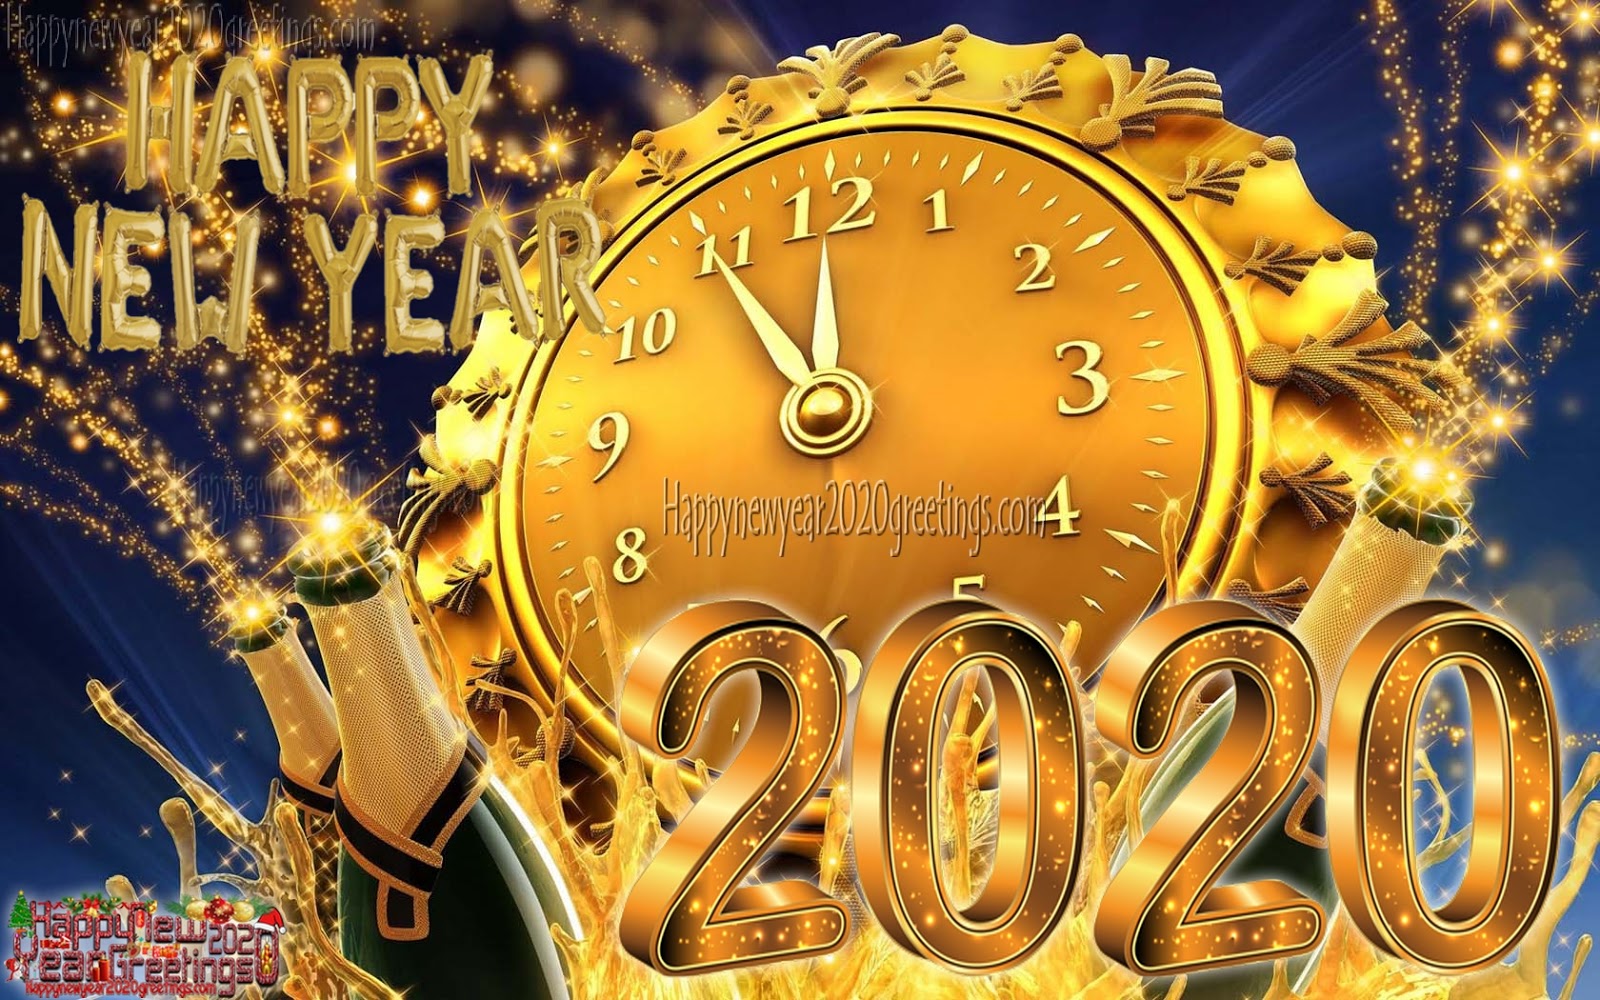 Happy New Year 2020 Images HD 1080p   New Year 2020 Ultra HD 4K